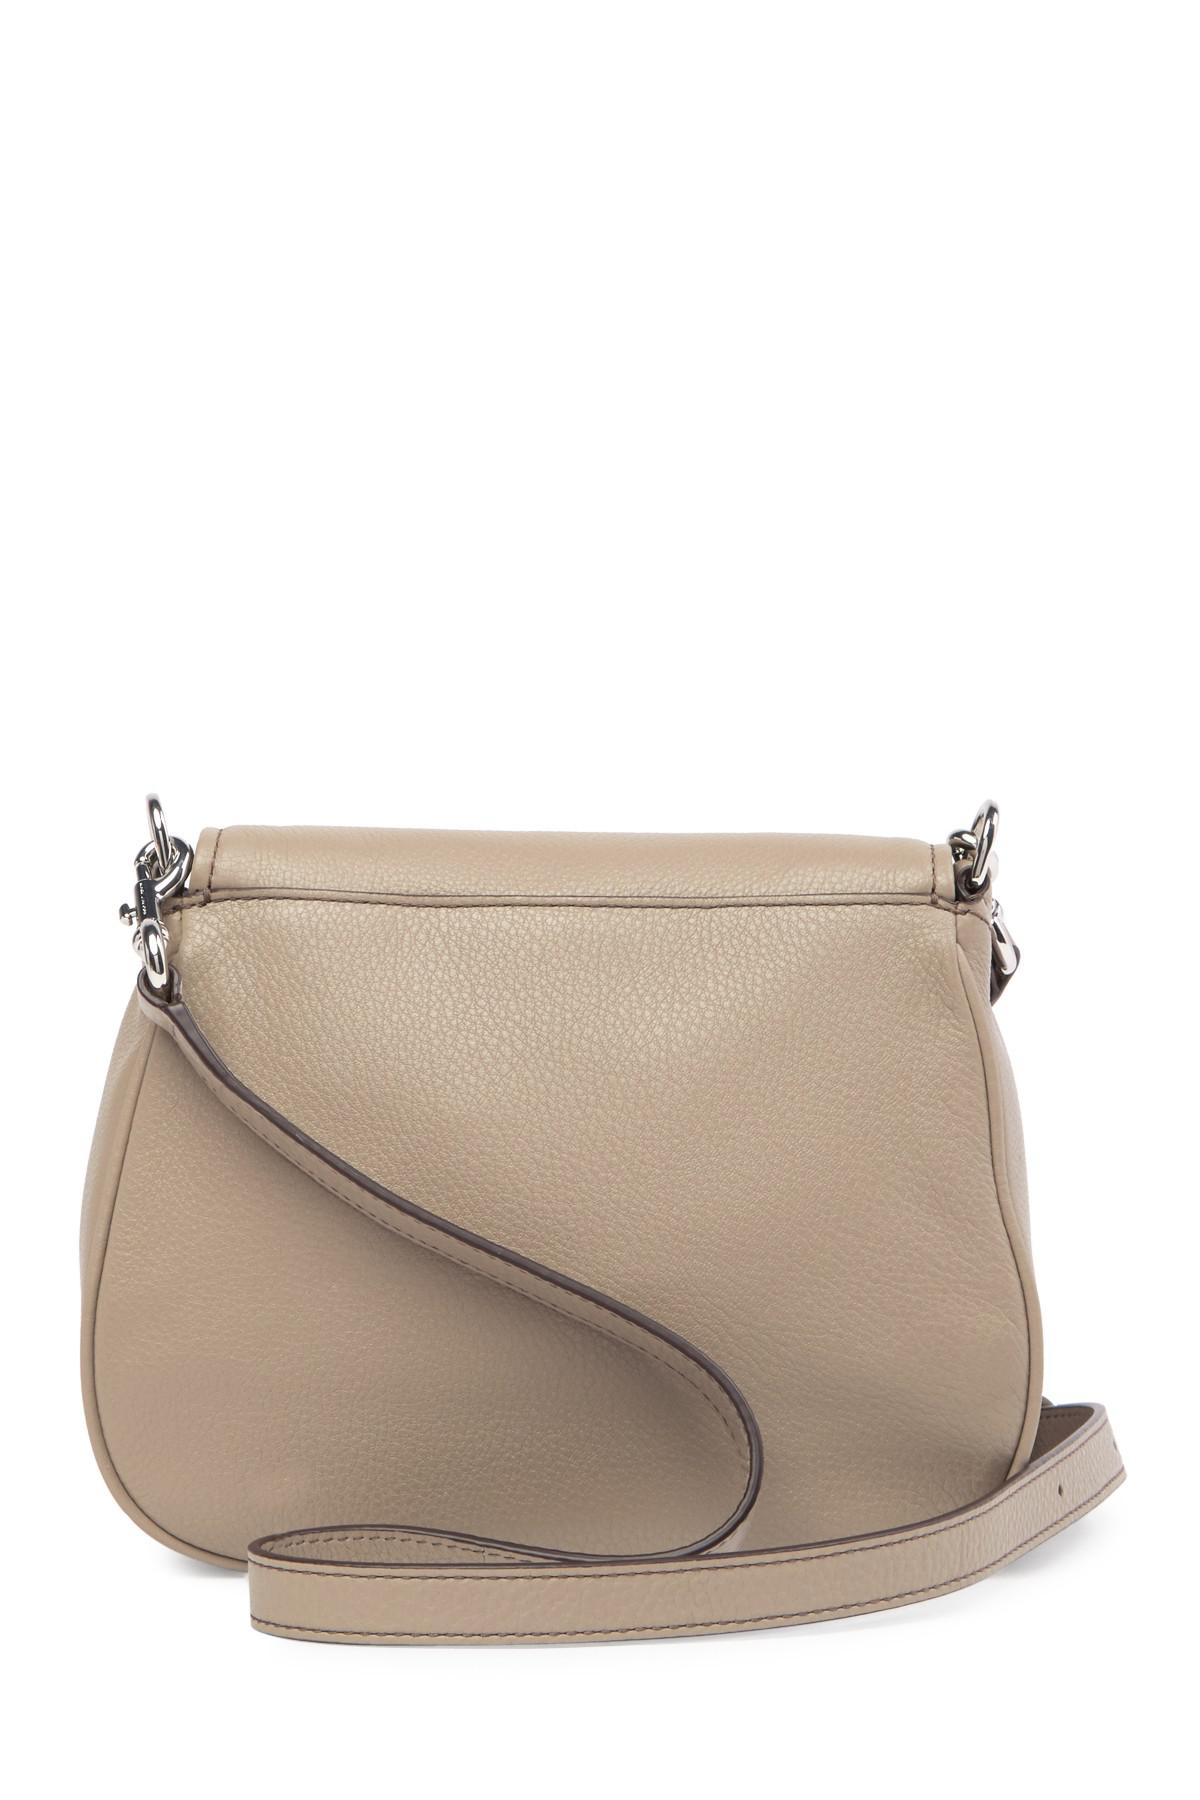 Marc Jacobs Empire City Mini Messenger Leather Crossbody Bag in Mink ...